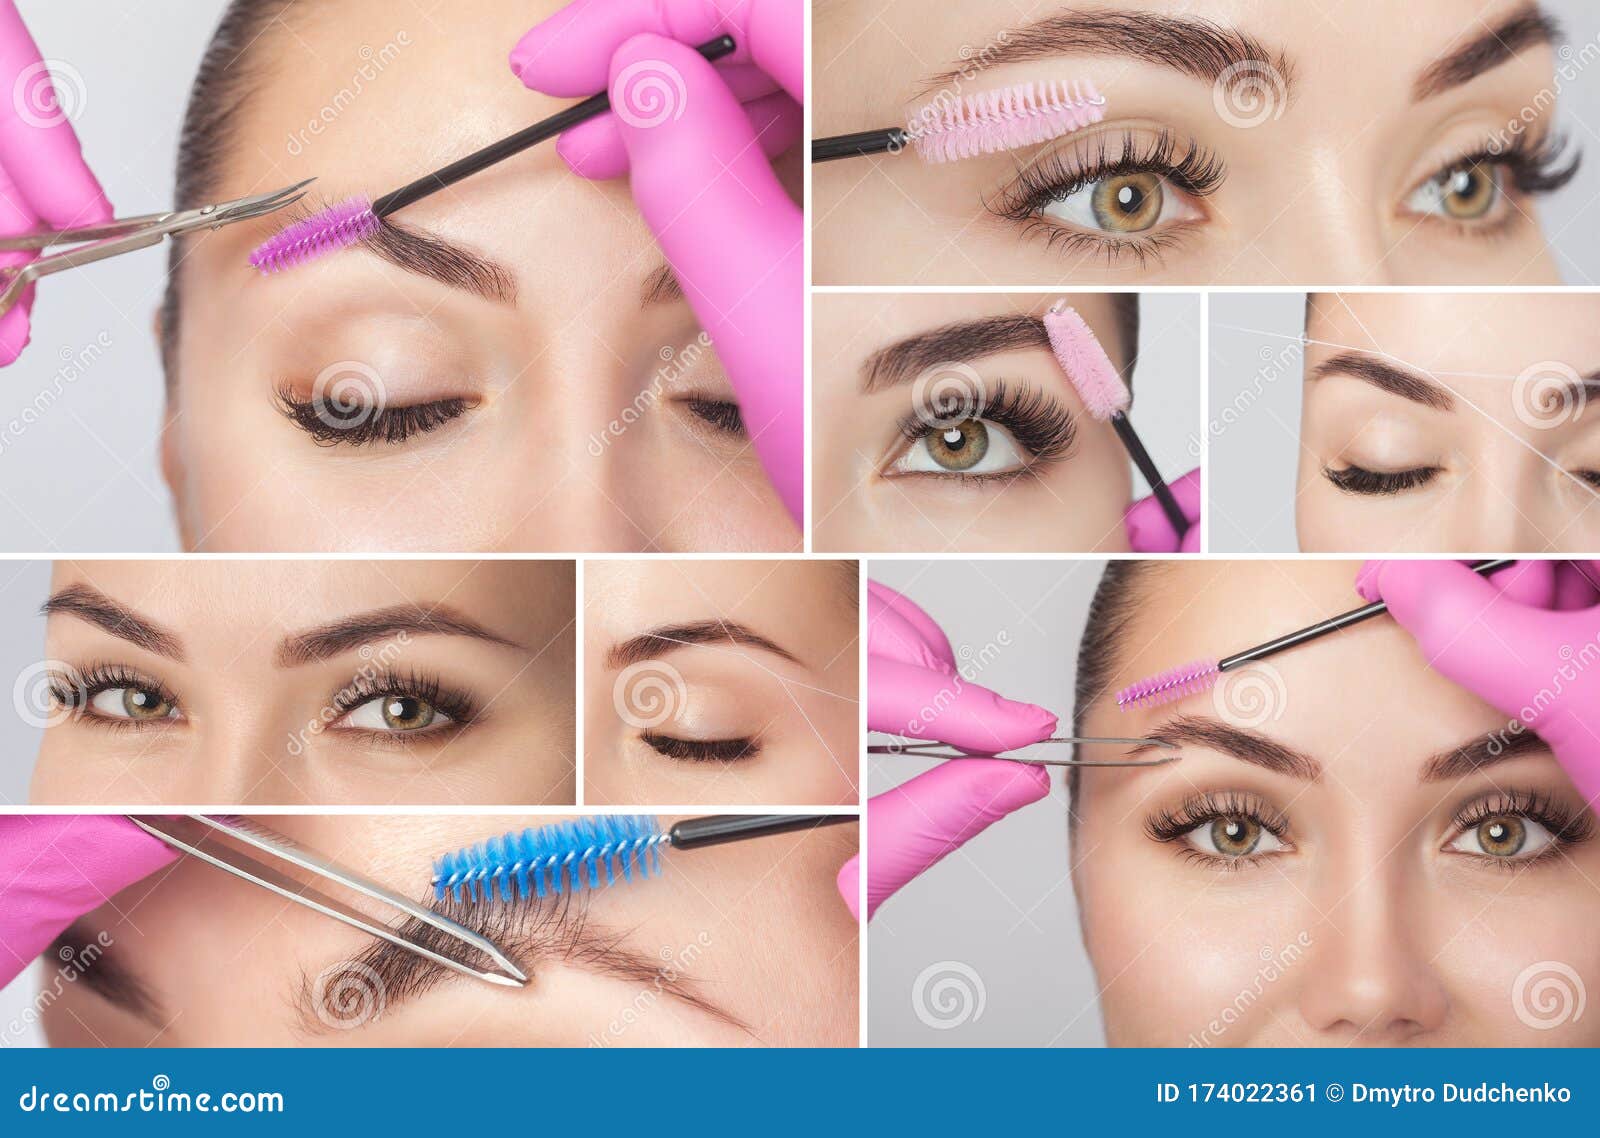 make-up artist plucks eyebrows with tweezers to a woman before staining with henna.makeup concept, eyebrow  modeling and